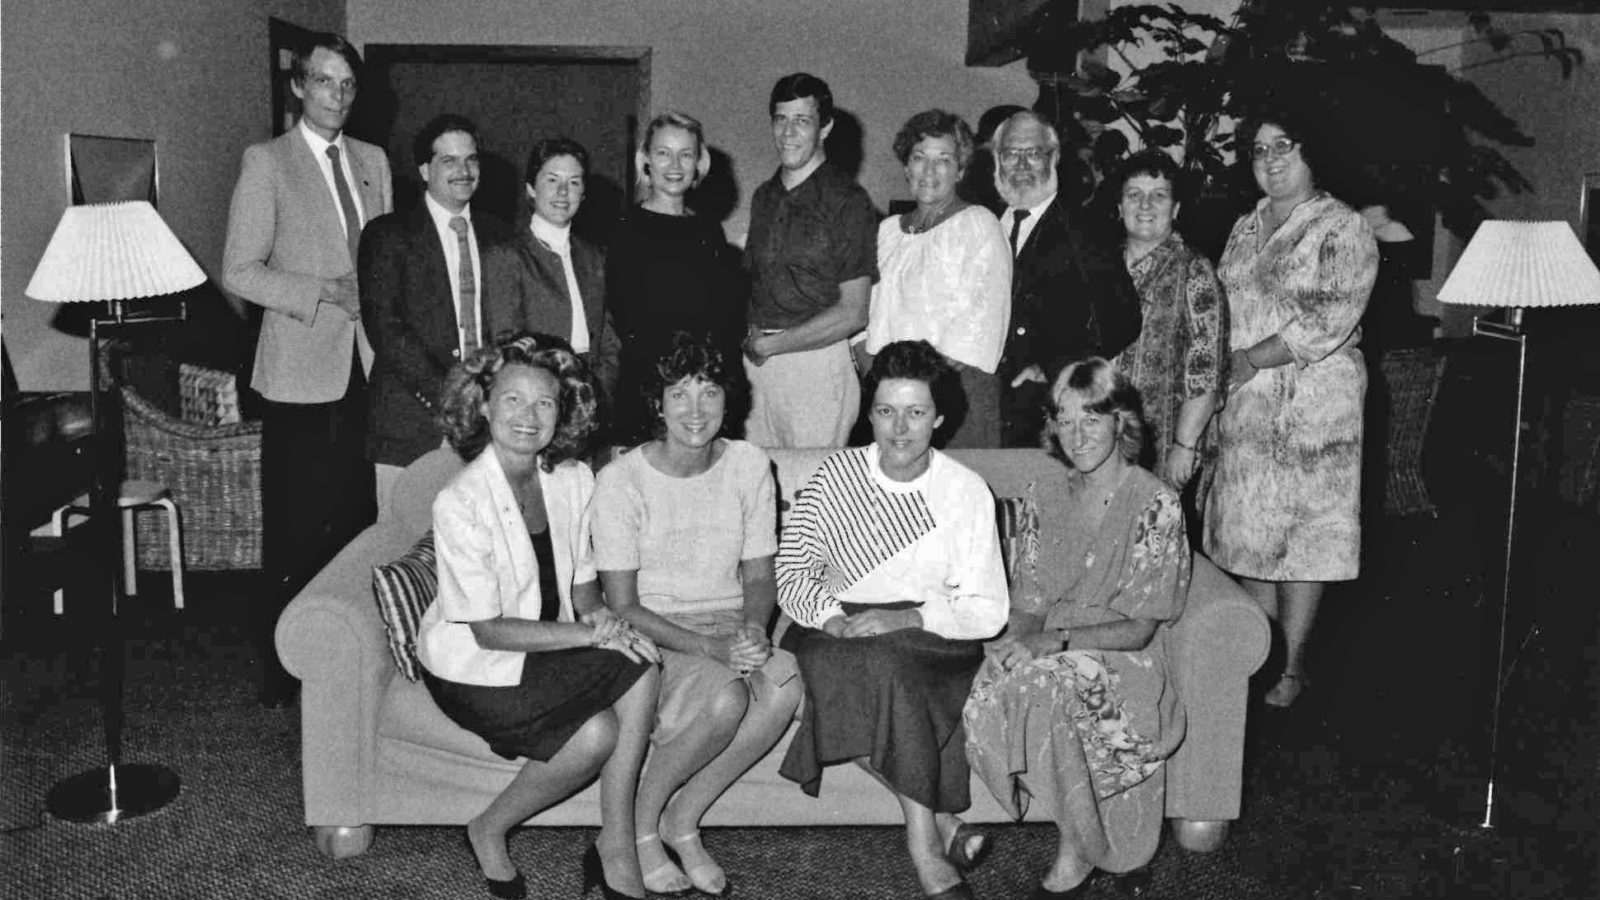 Brenda Duncan and others smiling in group photo